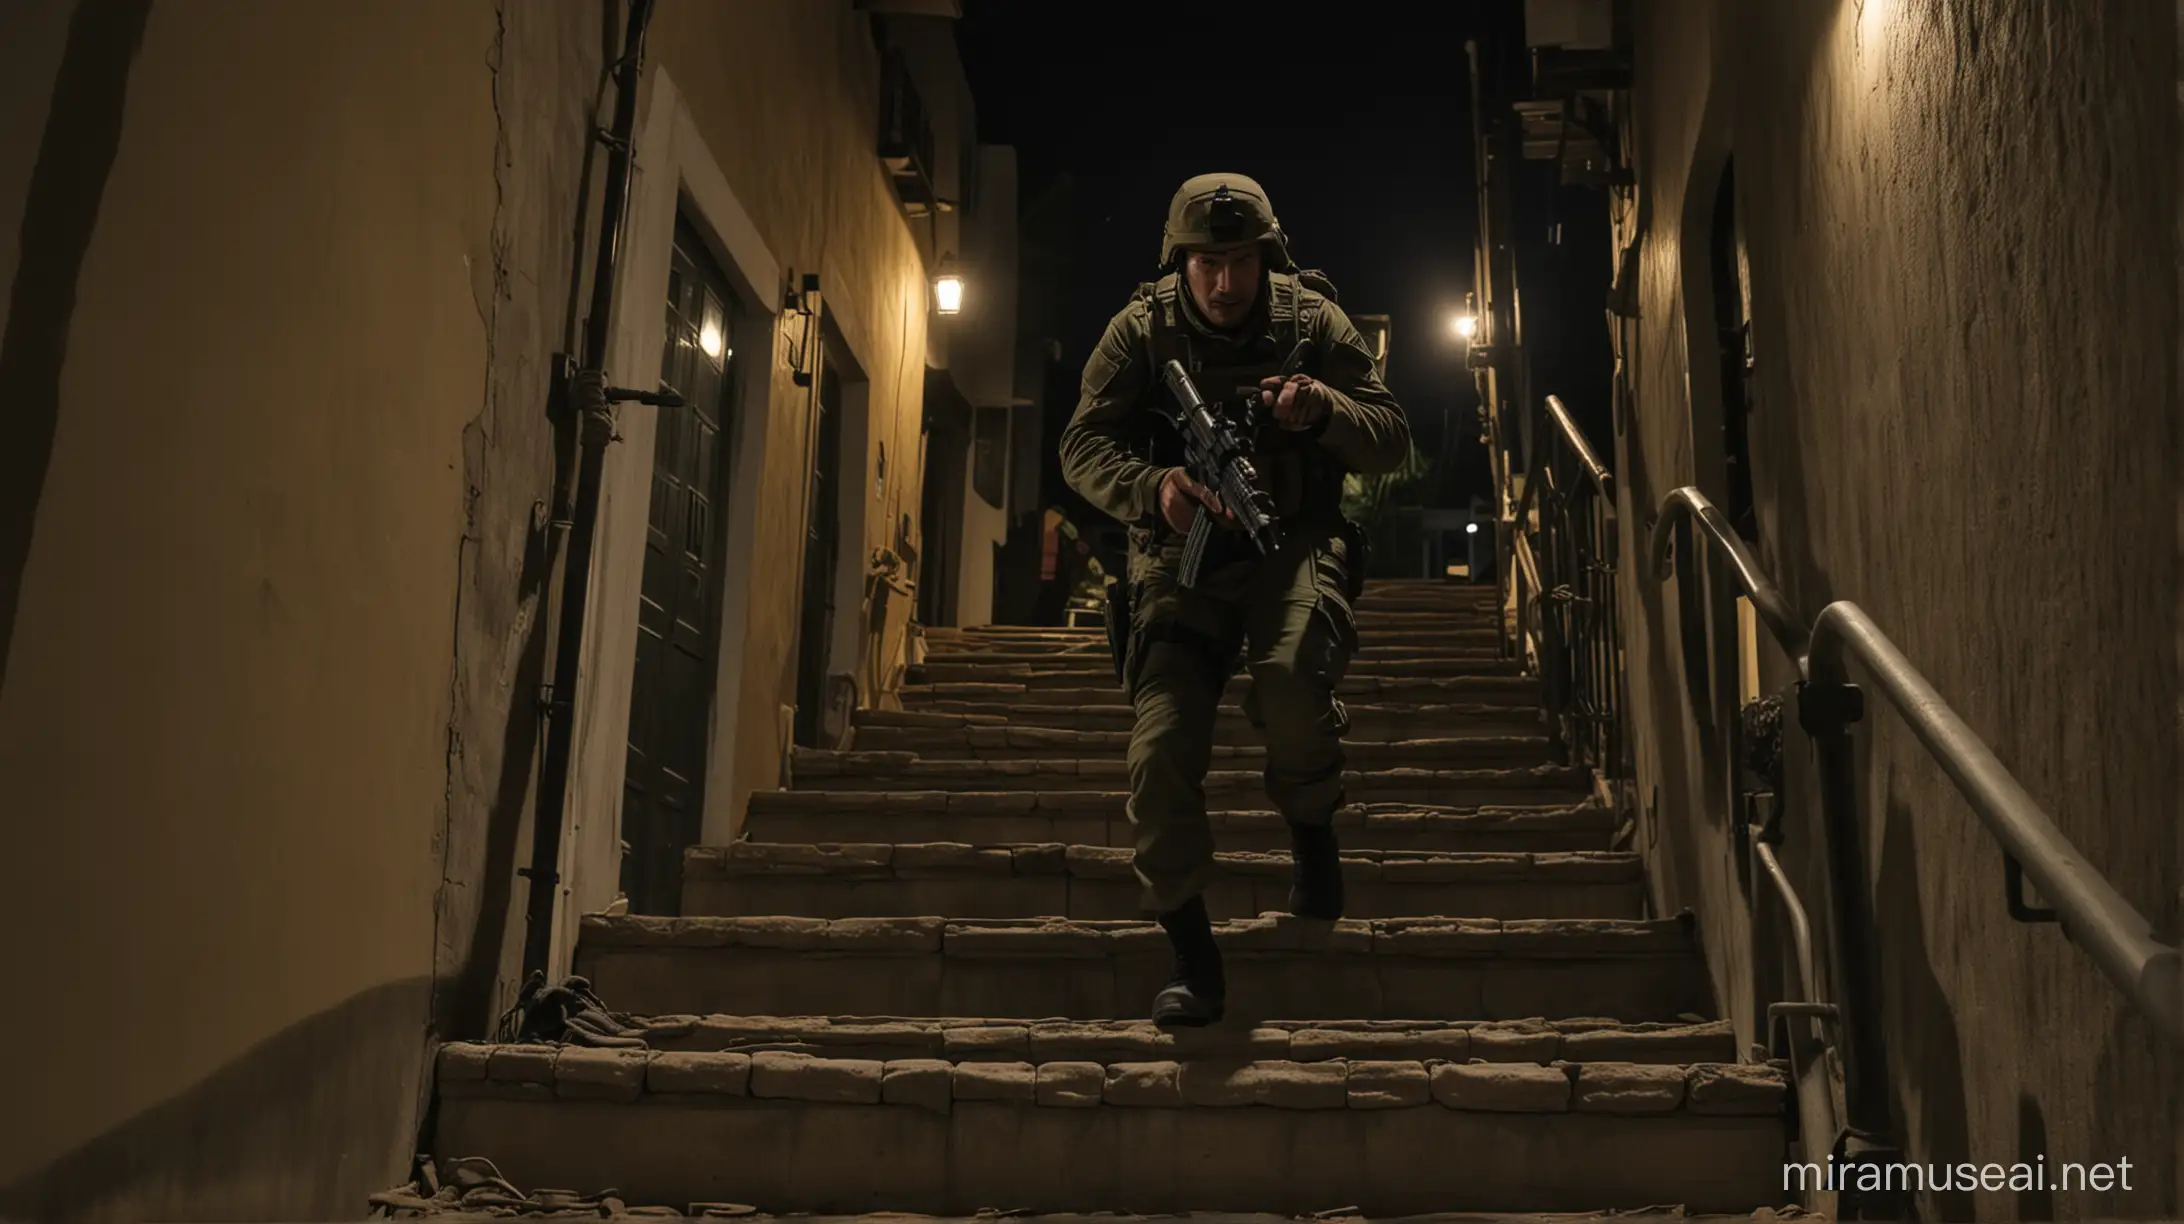 commando unit climbing stairs of the house in night

